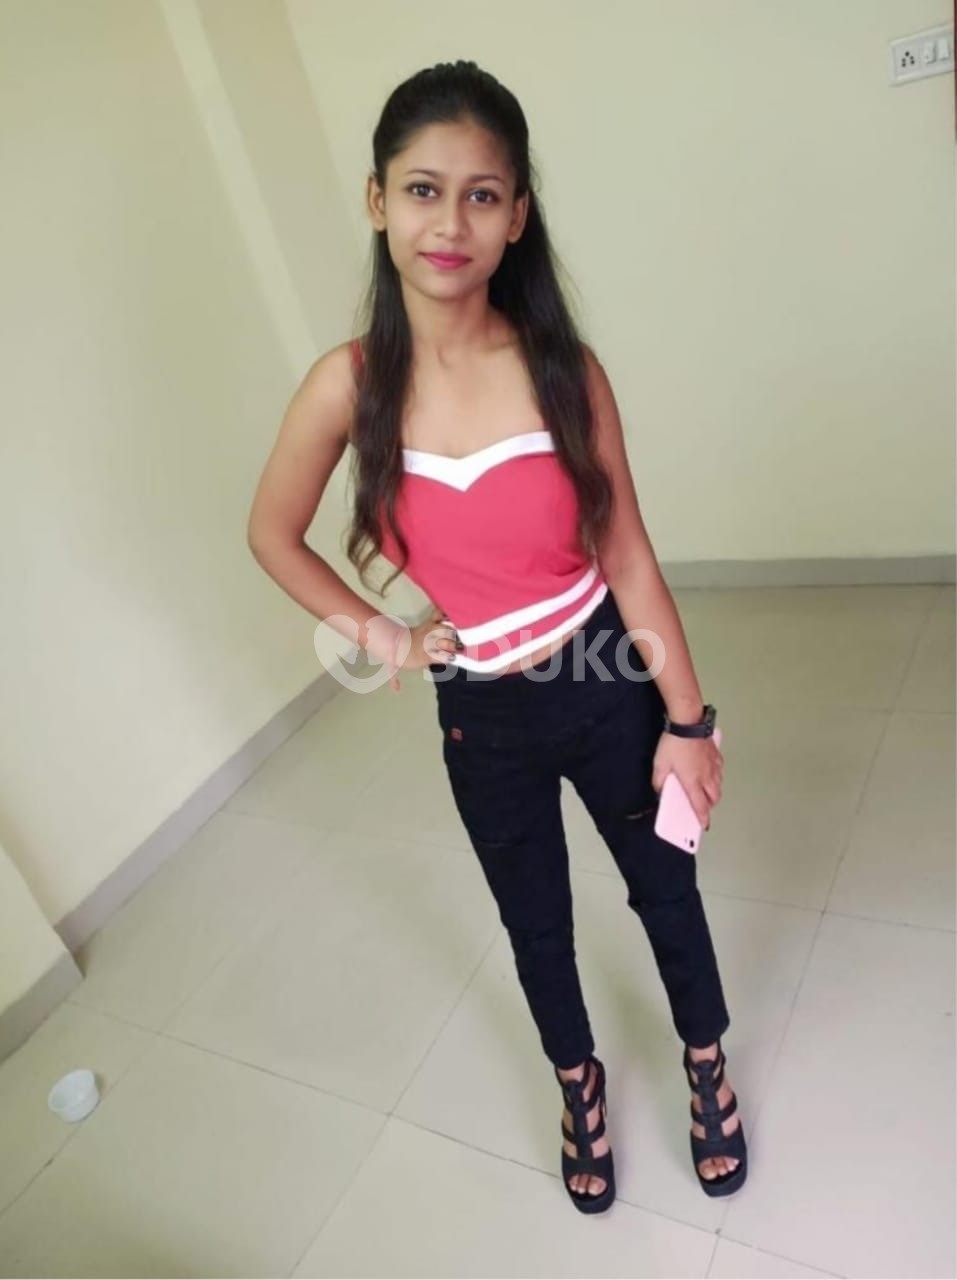 Byculla ,,,,,LOW,,,, PRICE SPECIAL KAVYA ESCORT